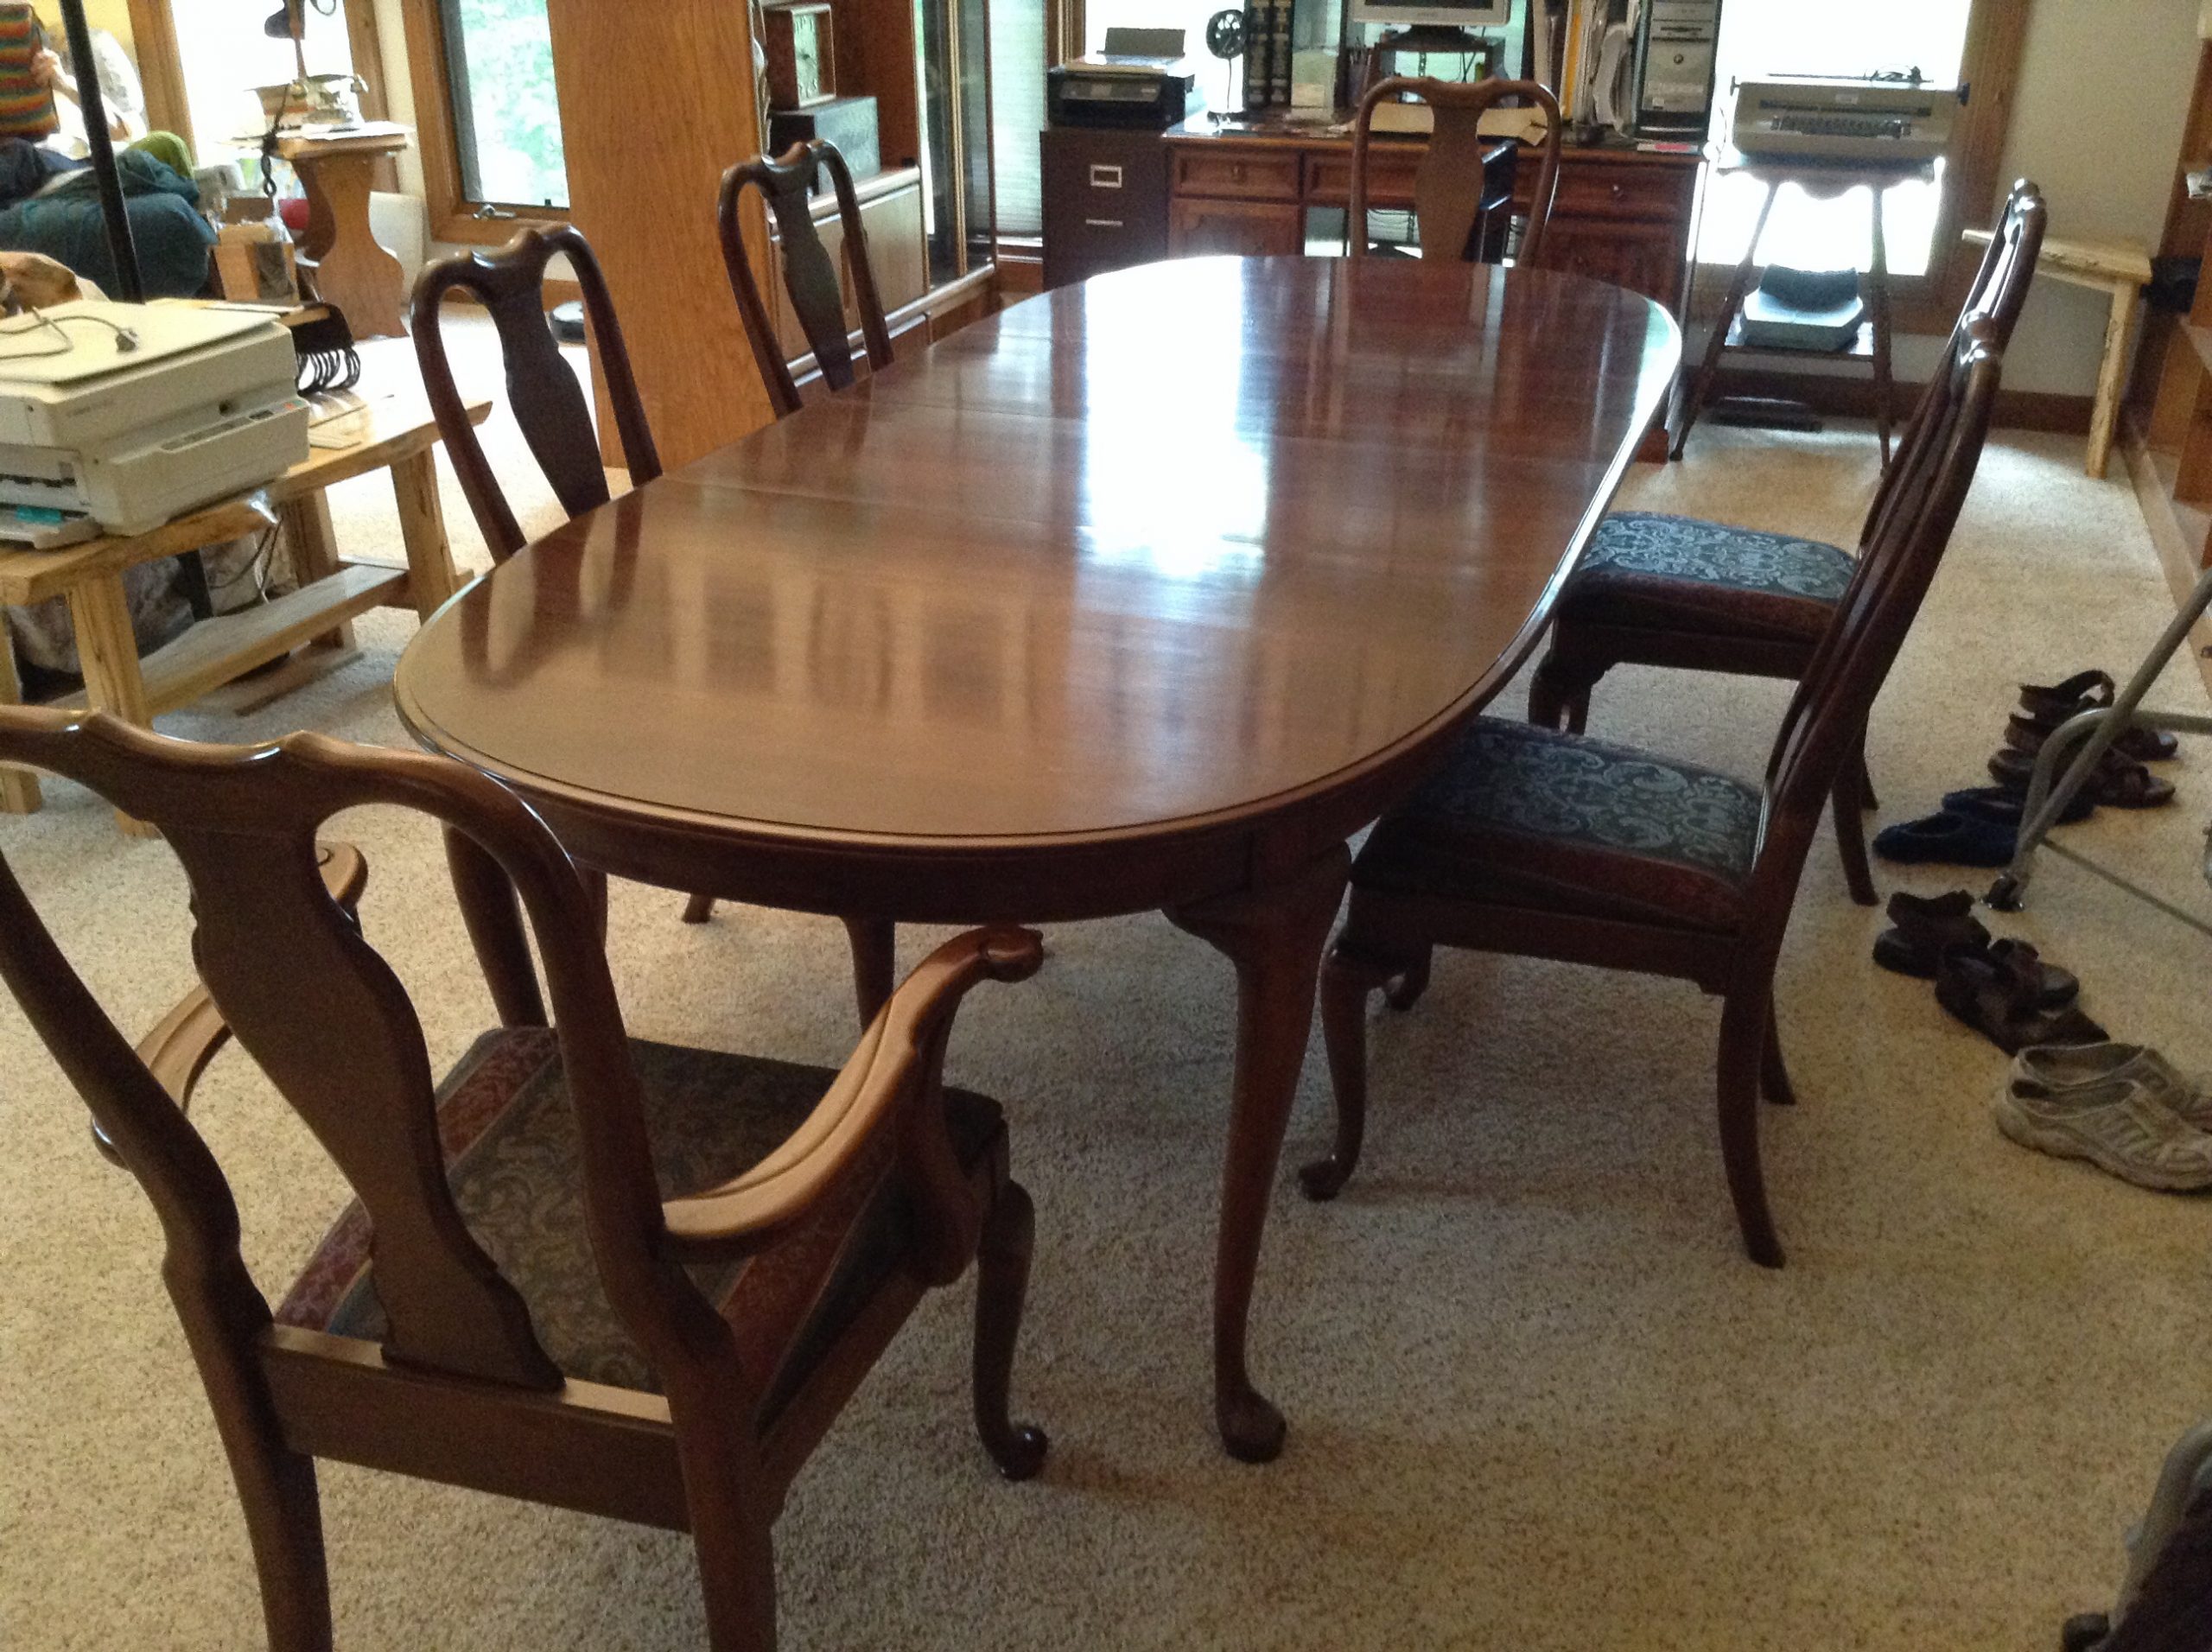 Kling Dining Room Chairs From Ethan Allen